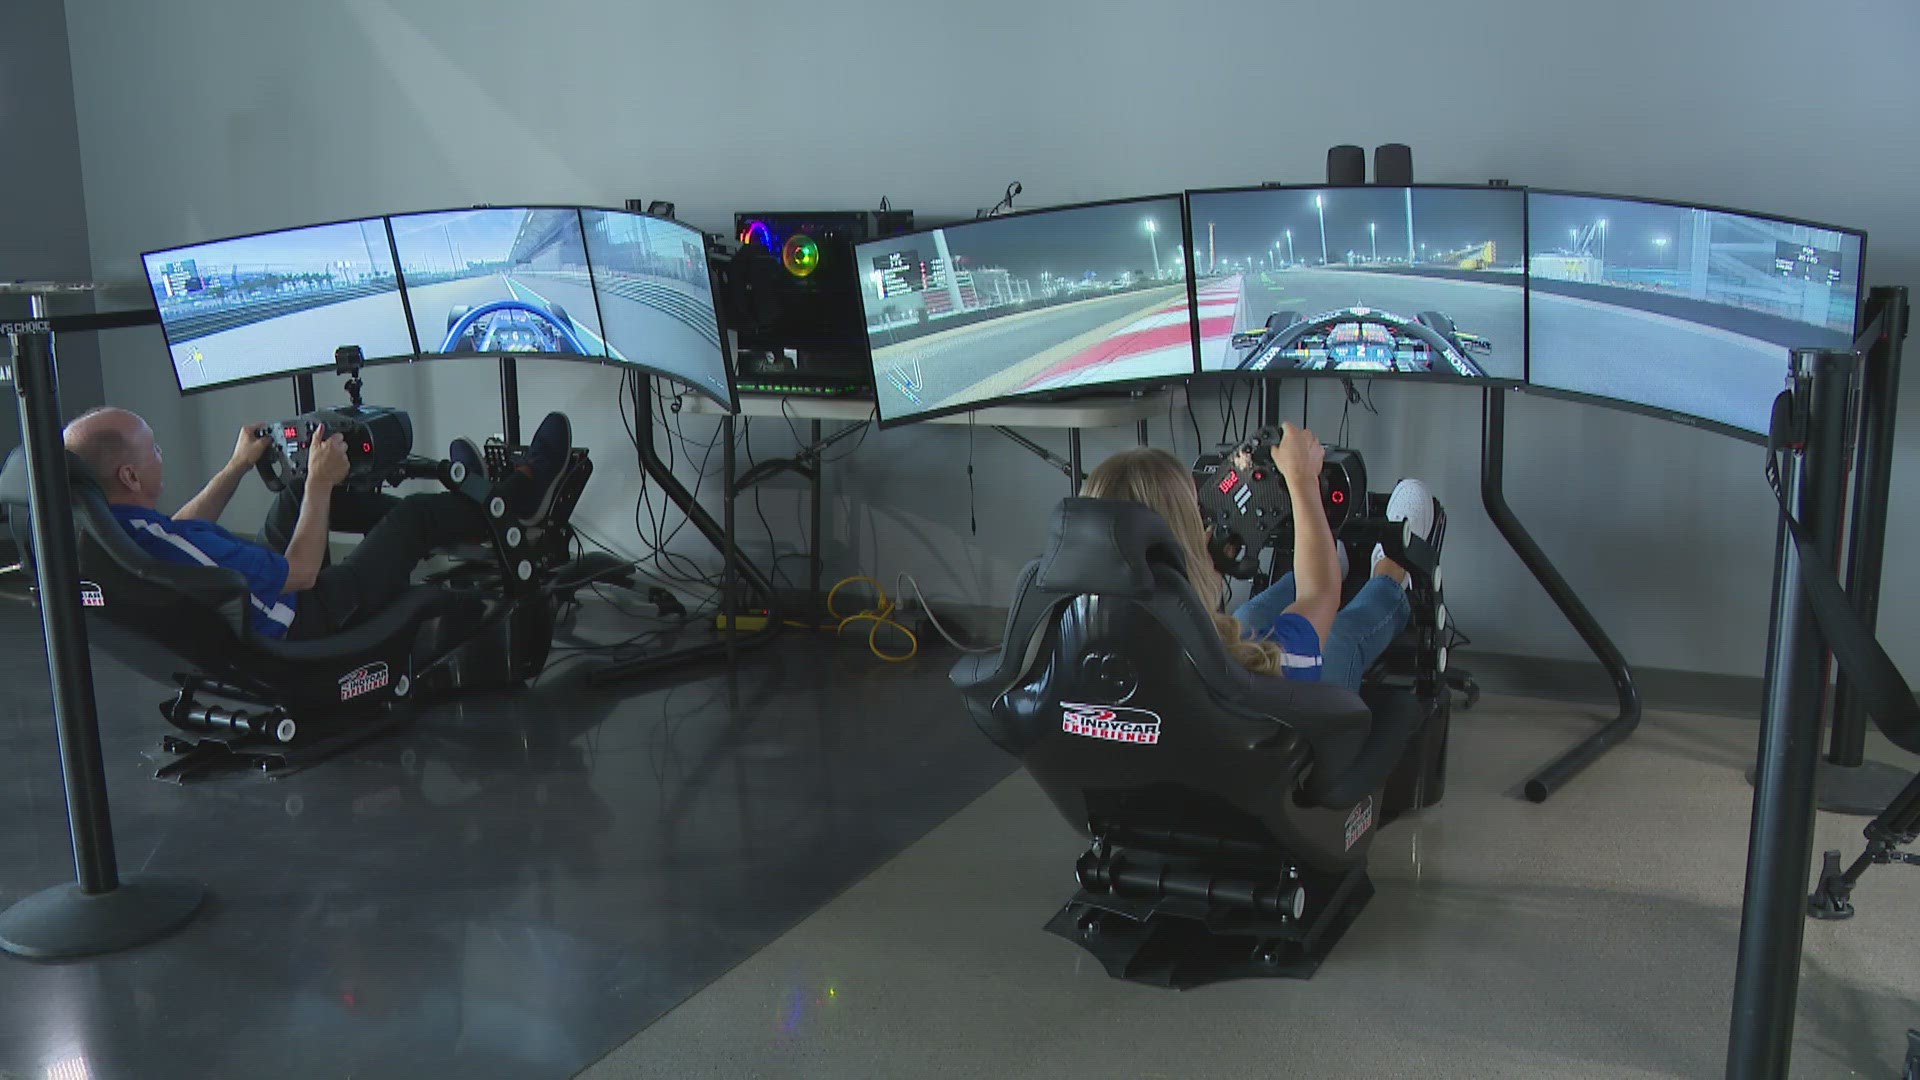 Dallara is also equipped with two of its own iRacing Simulators, in addition to much more massive state-of-the-art technology.